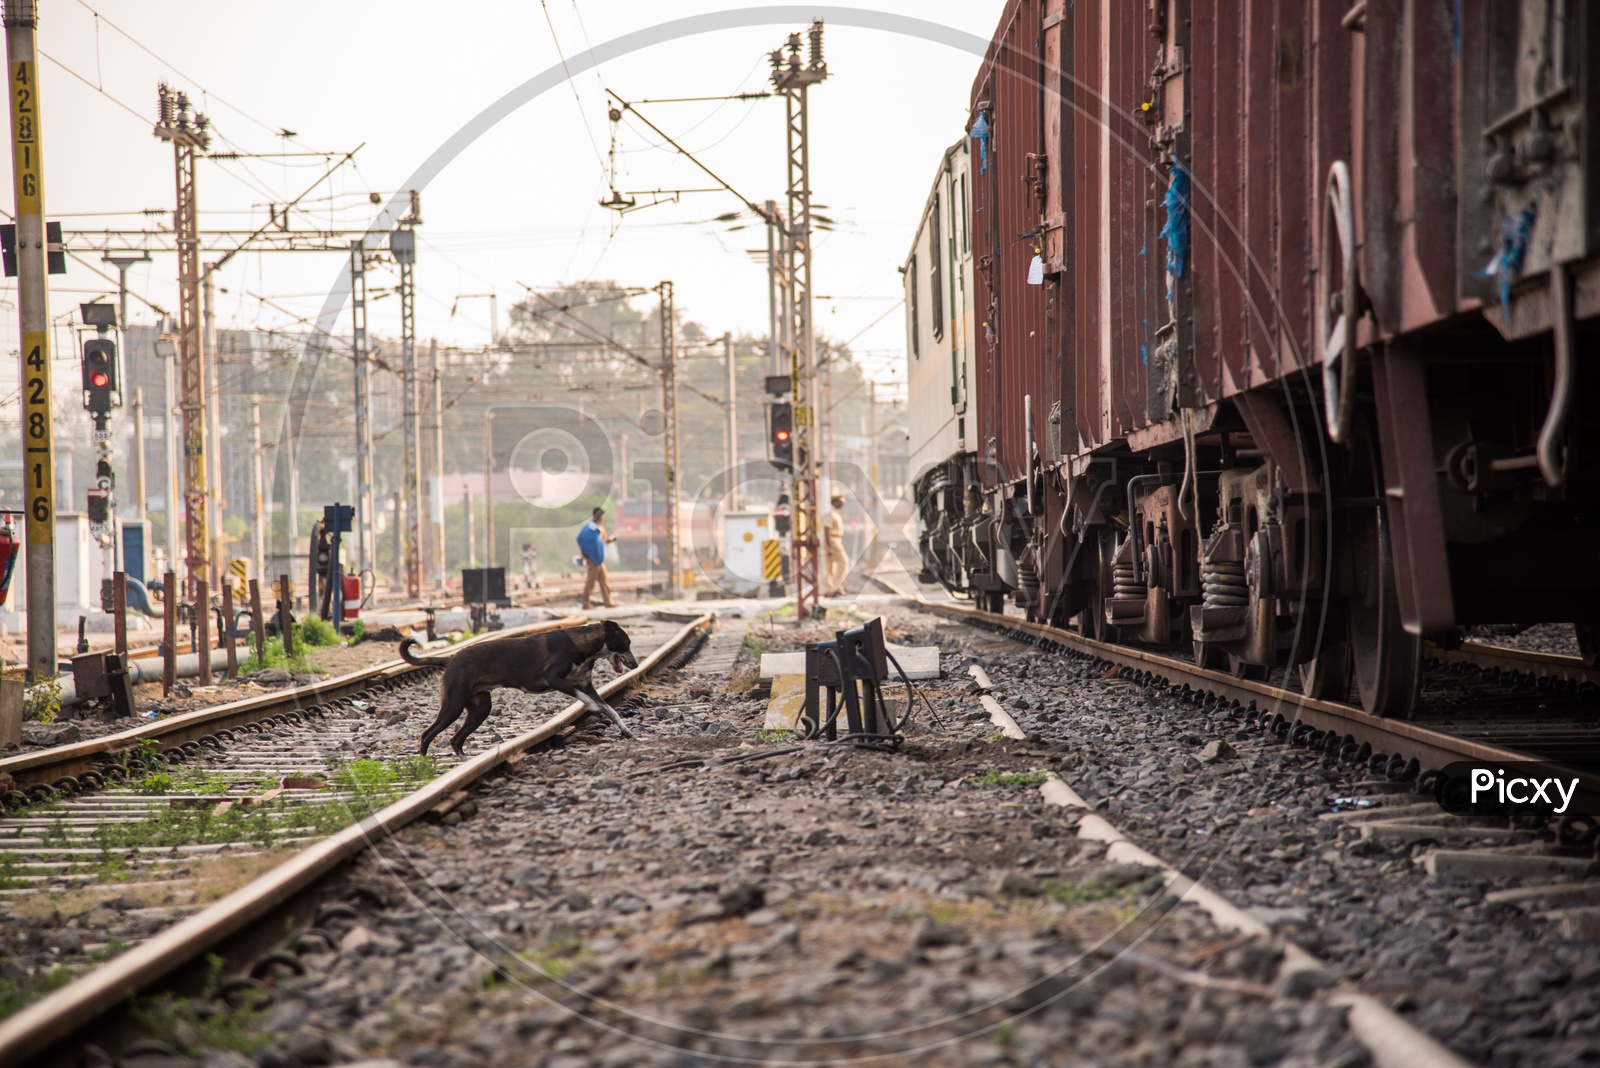 Dogs at Railway Tracks.